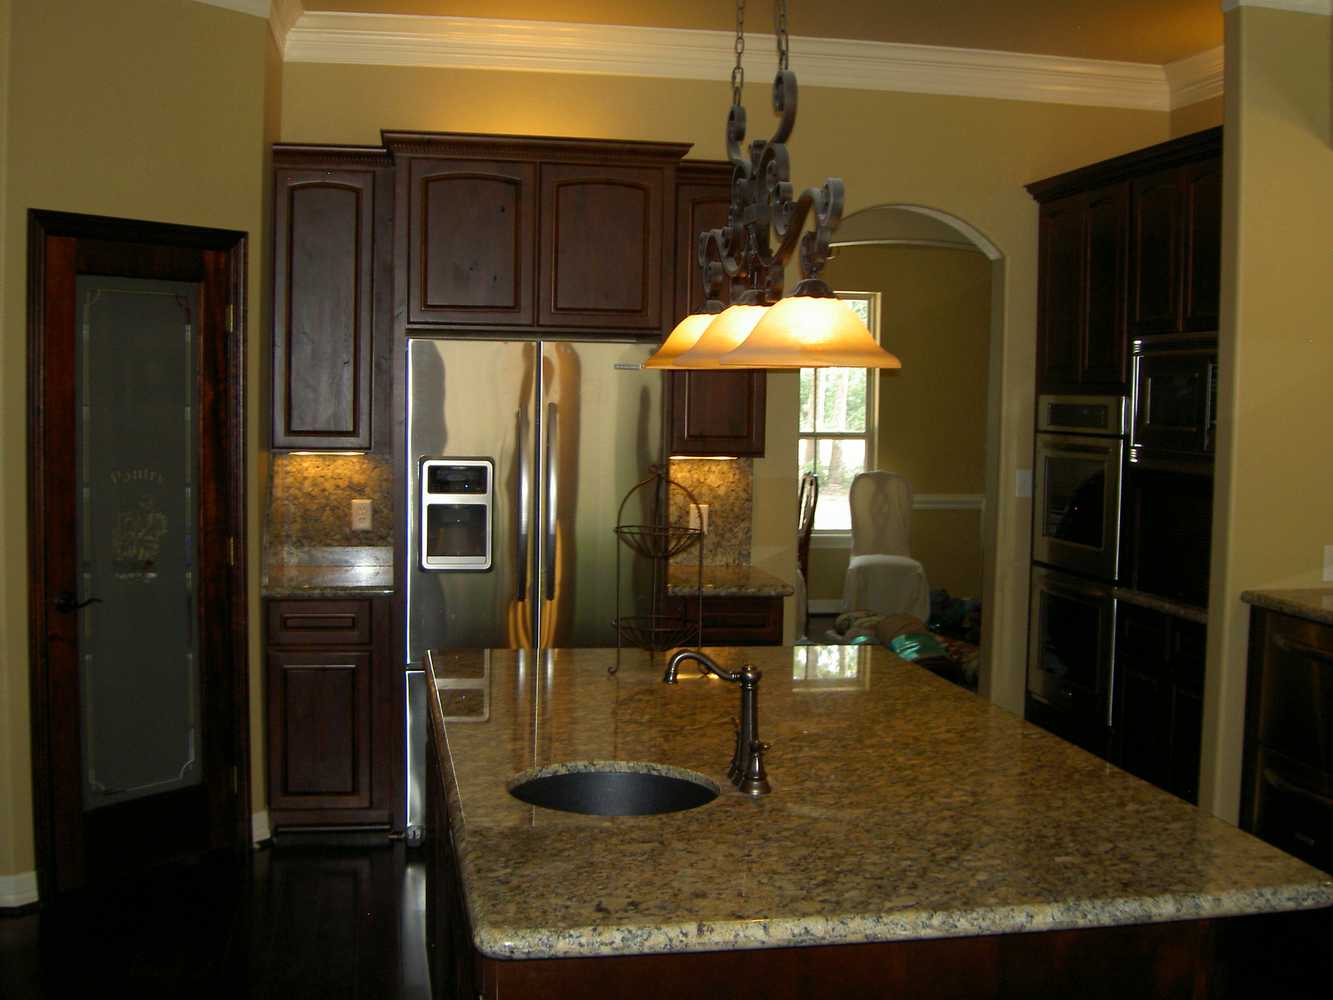 Kitchen Cabinets, Kitchen Remodeling, Granite Countertops By Ideal Kitchen and Bath